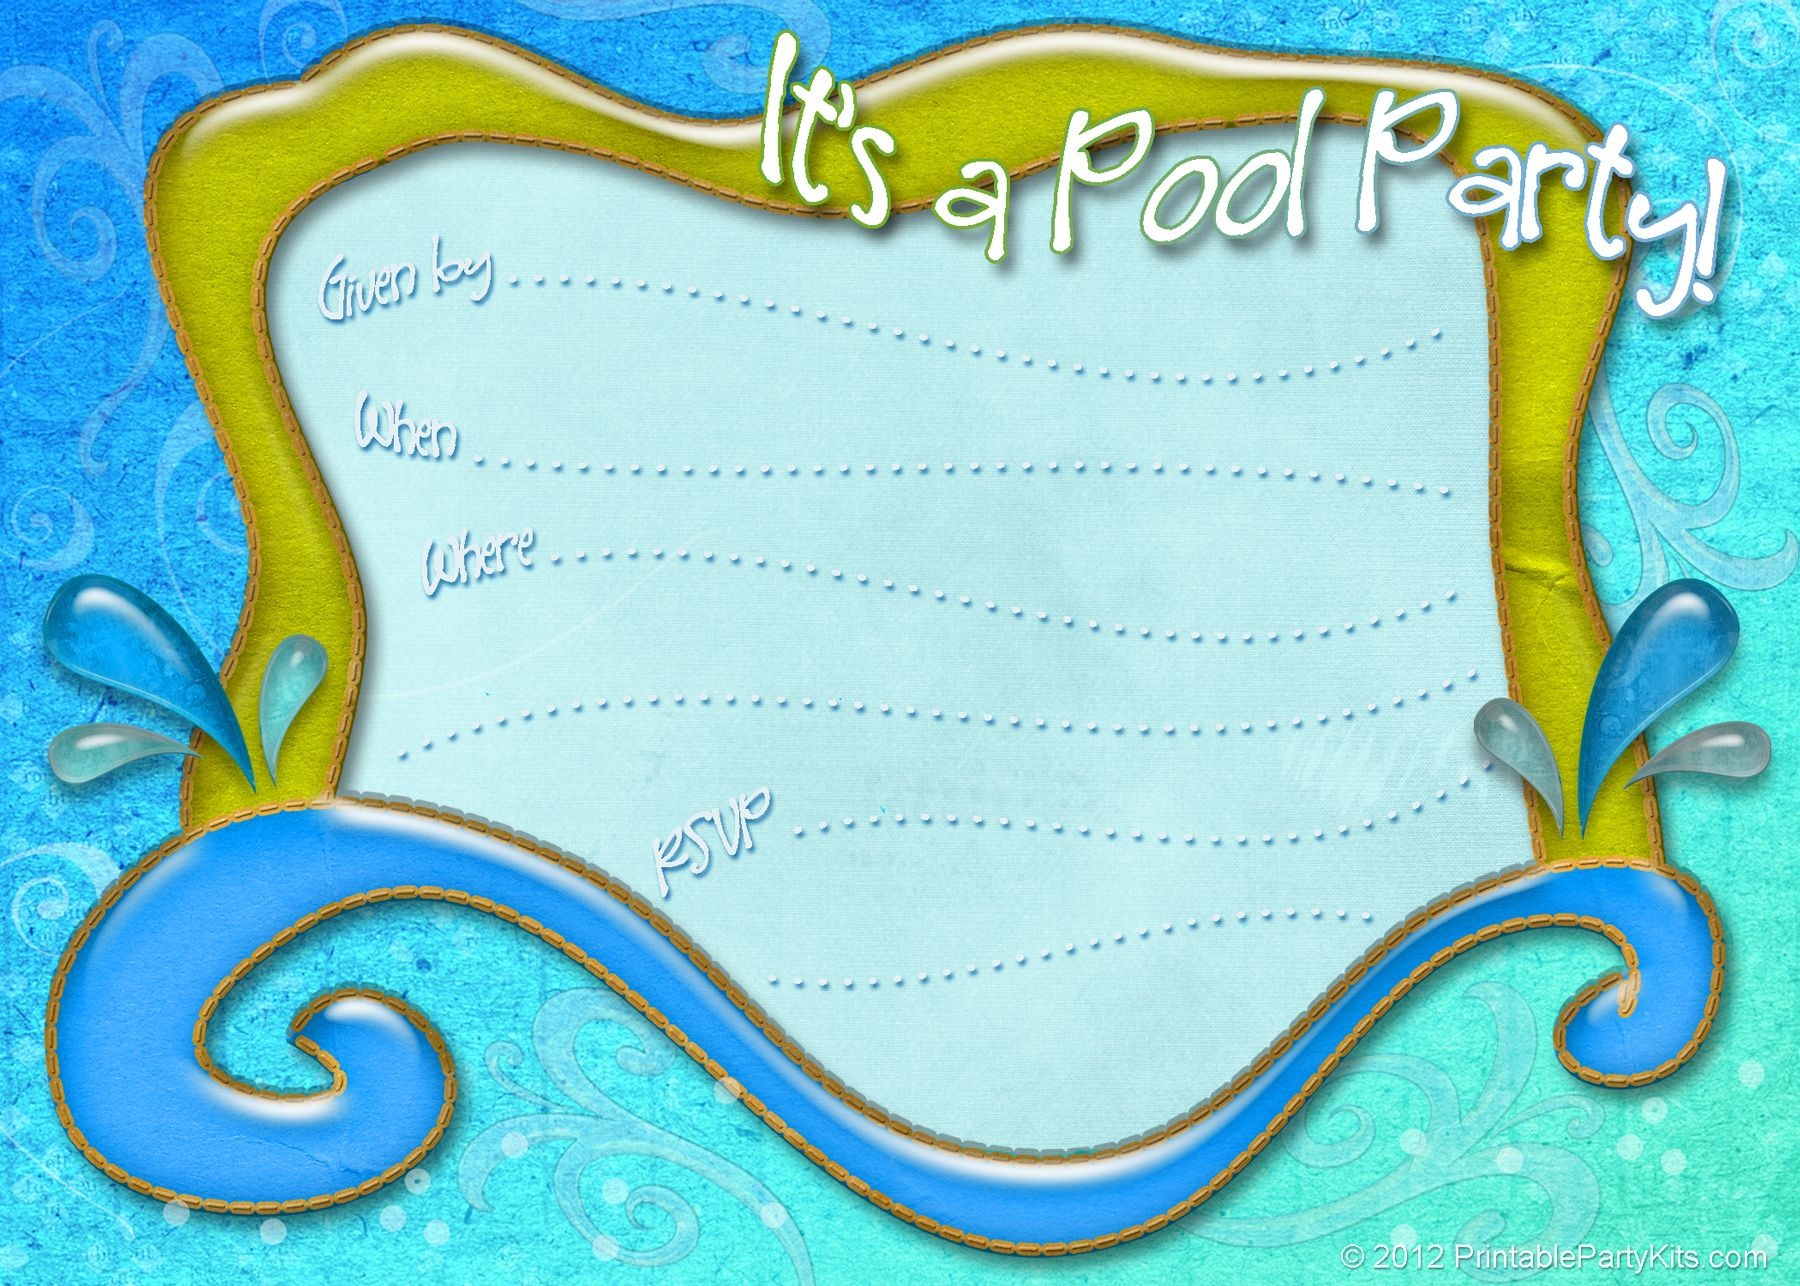 Free Printable Pool Party Invitation Template From - Free Printable Pool Party Birthday Invitations